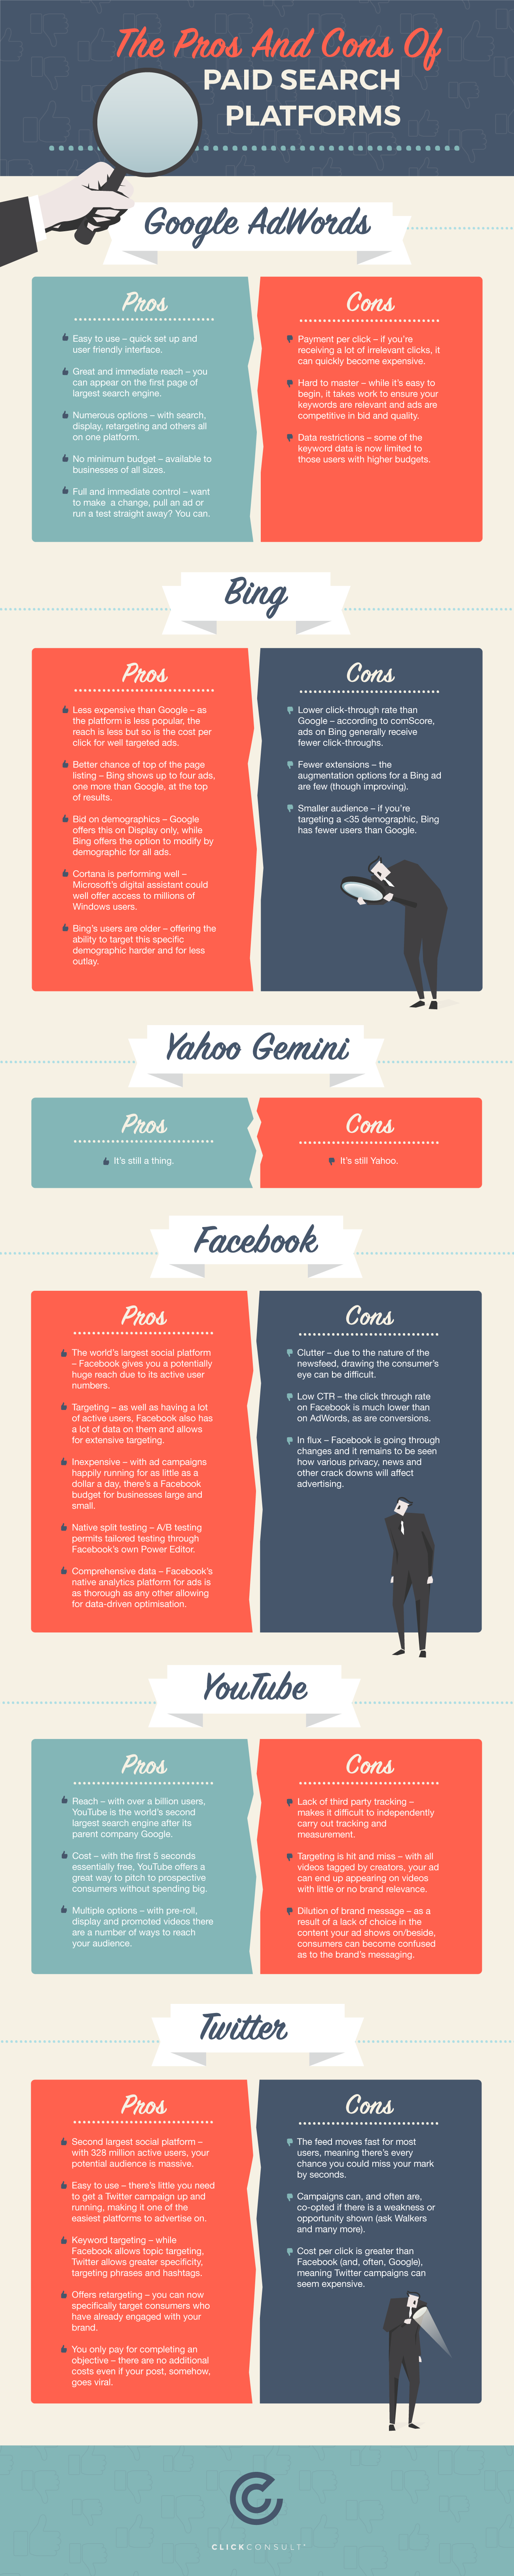 Google AdWords, YouTube, Bing, Yahoo or Facebook? The Pros and Cons of Paid Advertising Platforms [Infographic]